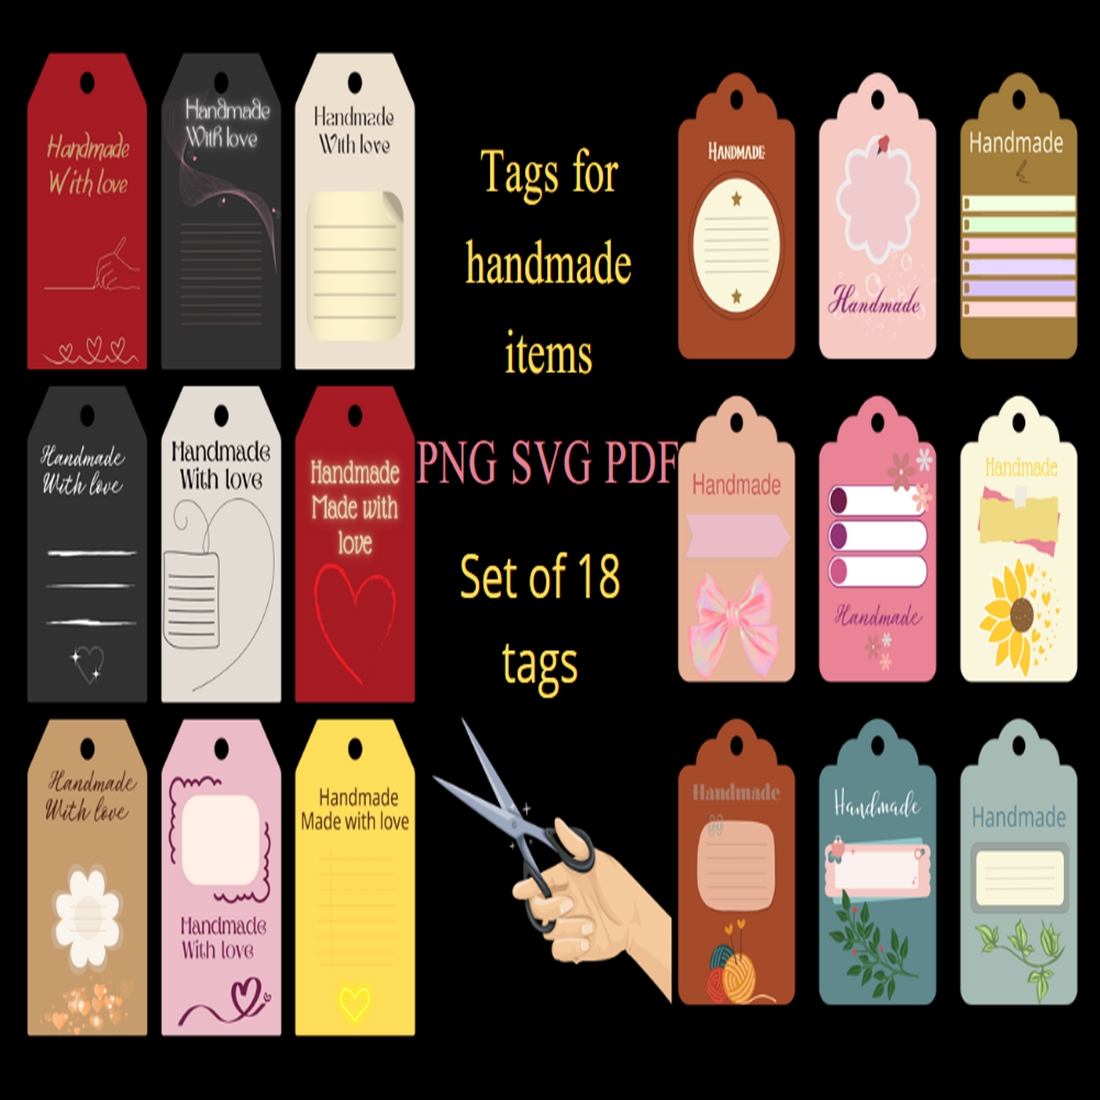 Tags for handmade items. Handmade label. DIY gift tag. Handmade stickers.  Business stickers. Made by hand with love. Packaging stickers. Printable  Tags - MasterBundles